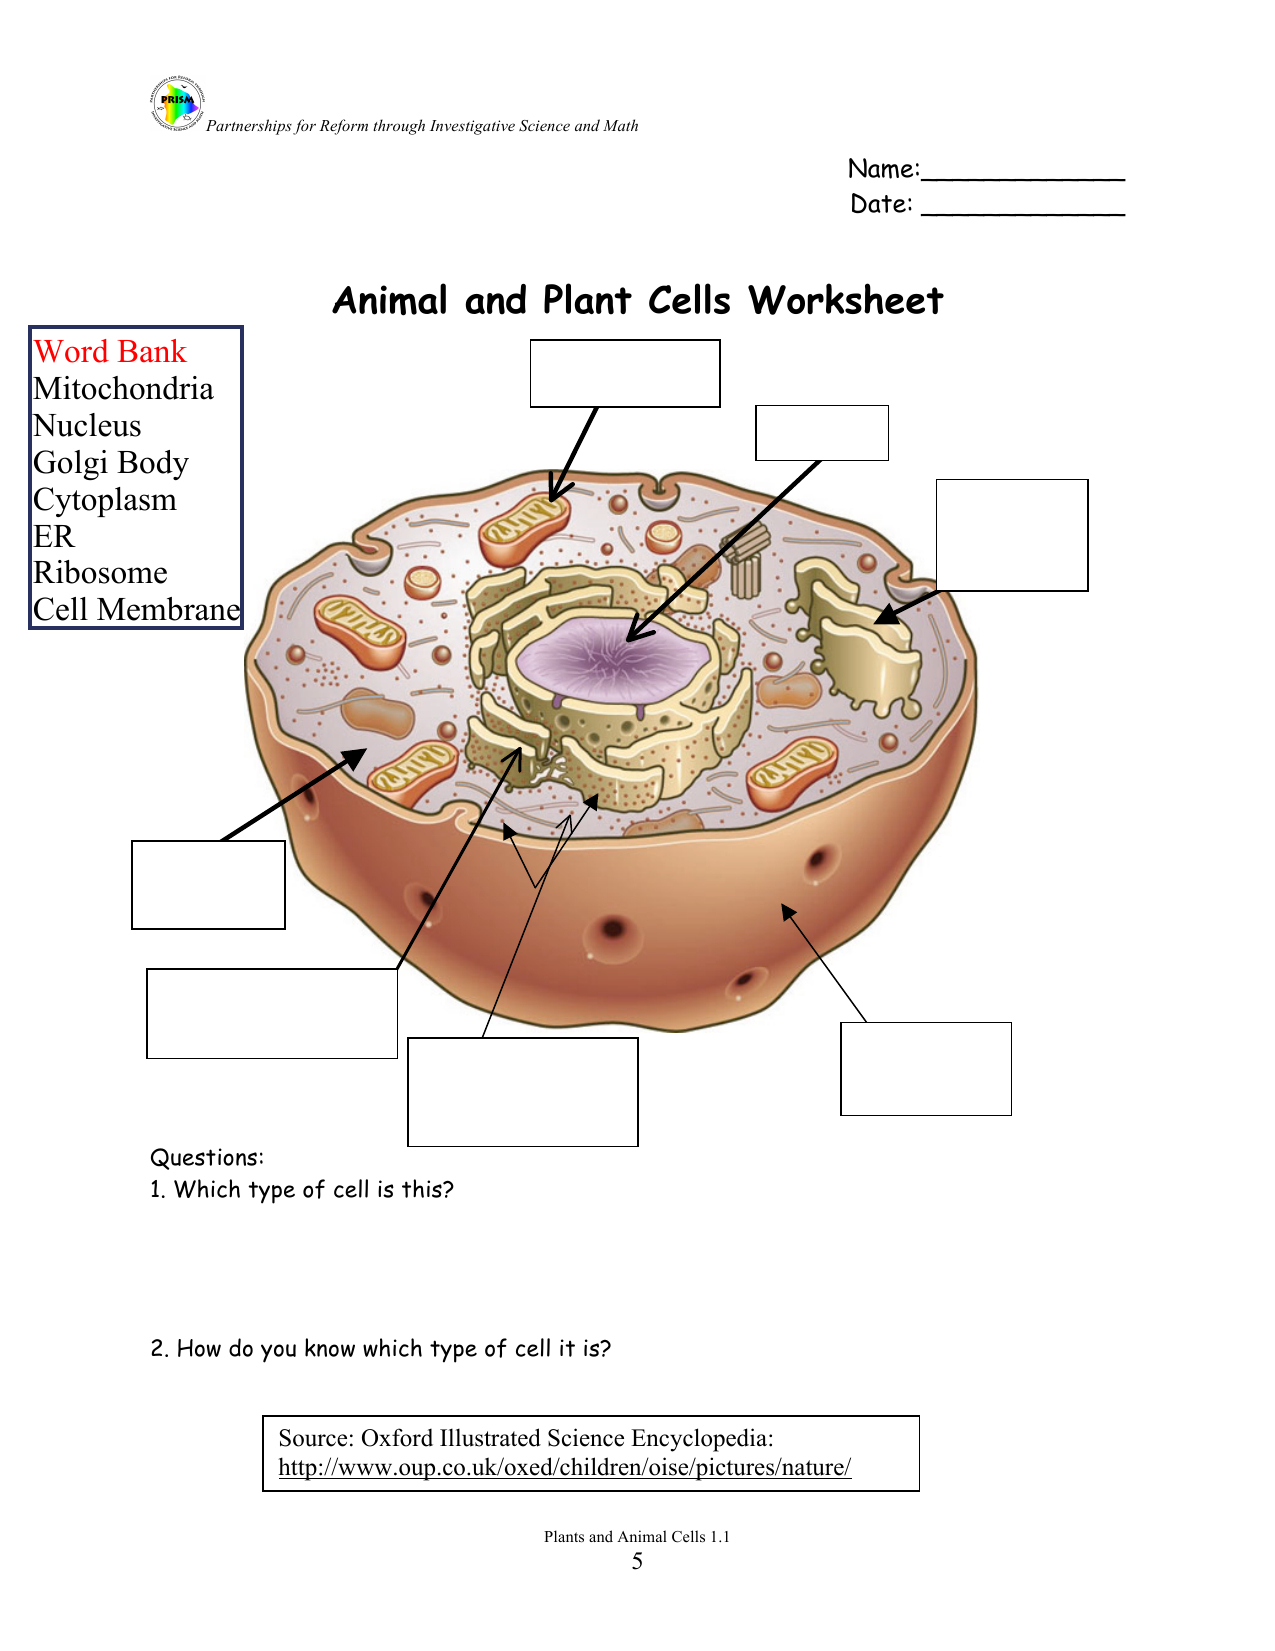 plant-cell-worksheets-free-plant-cell-worksheets-for-students-to